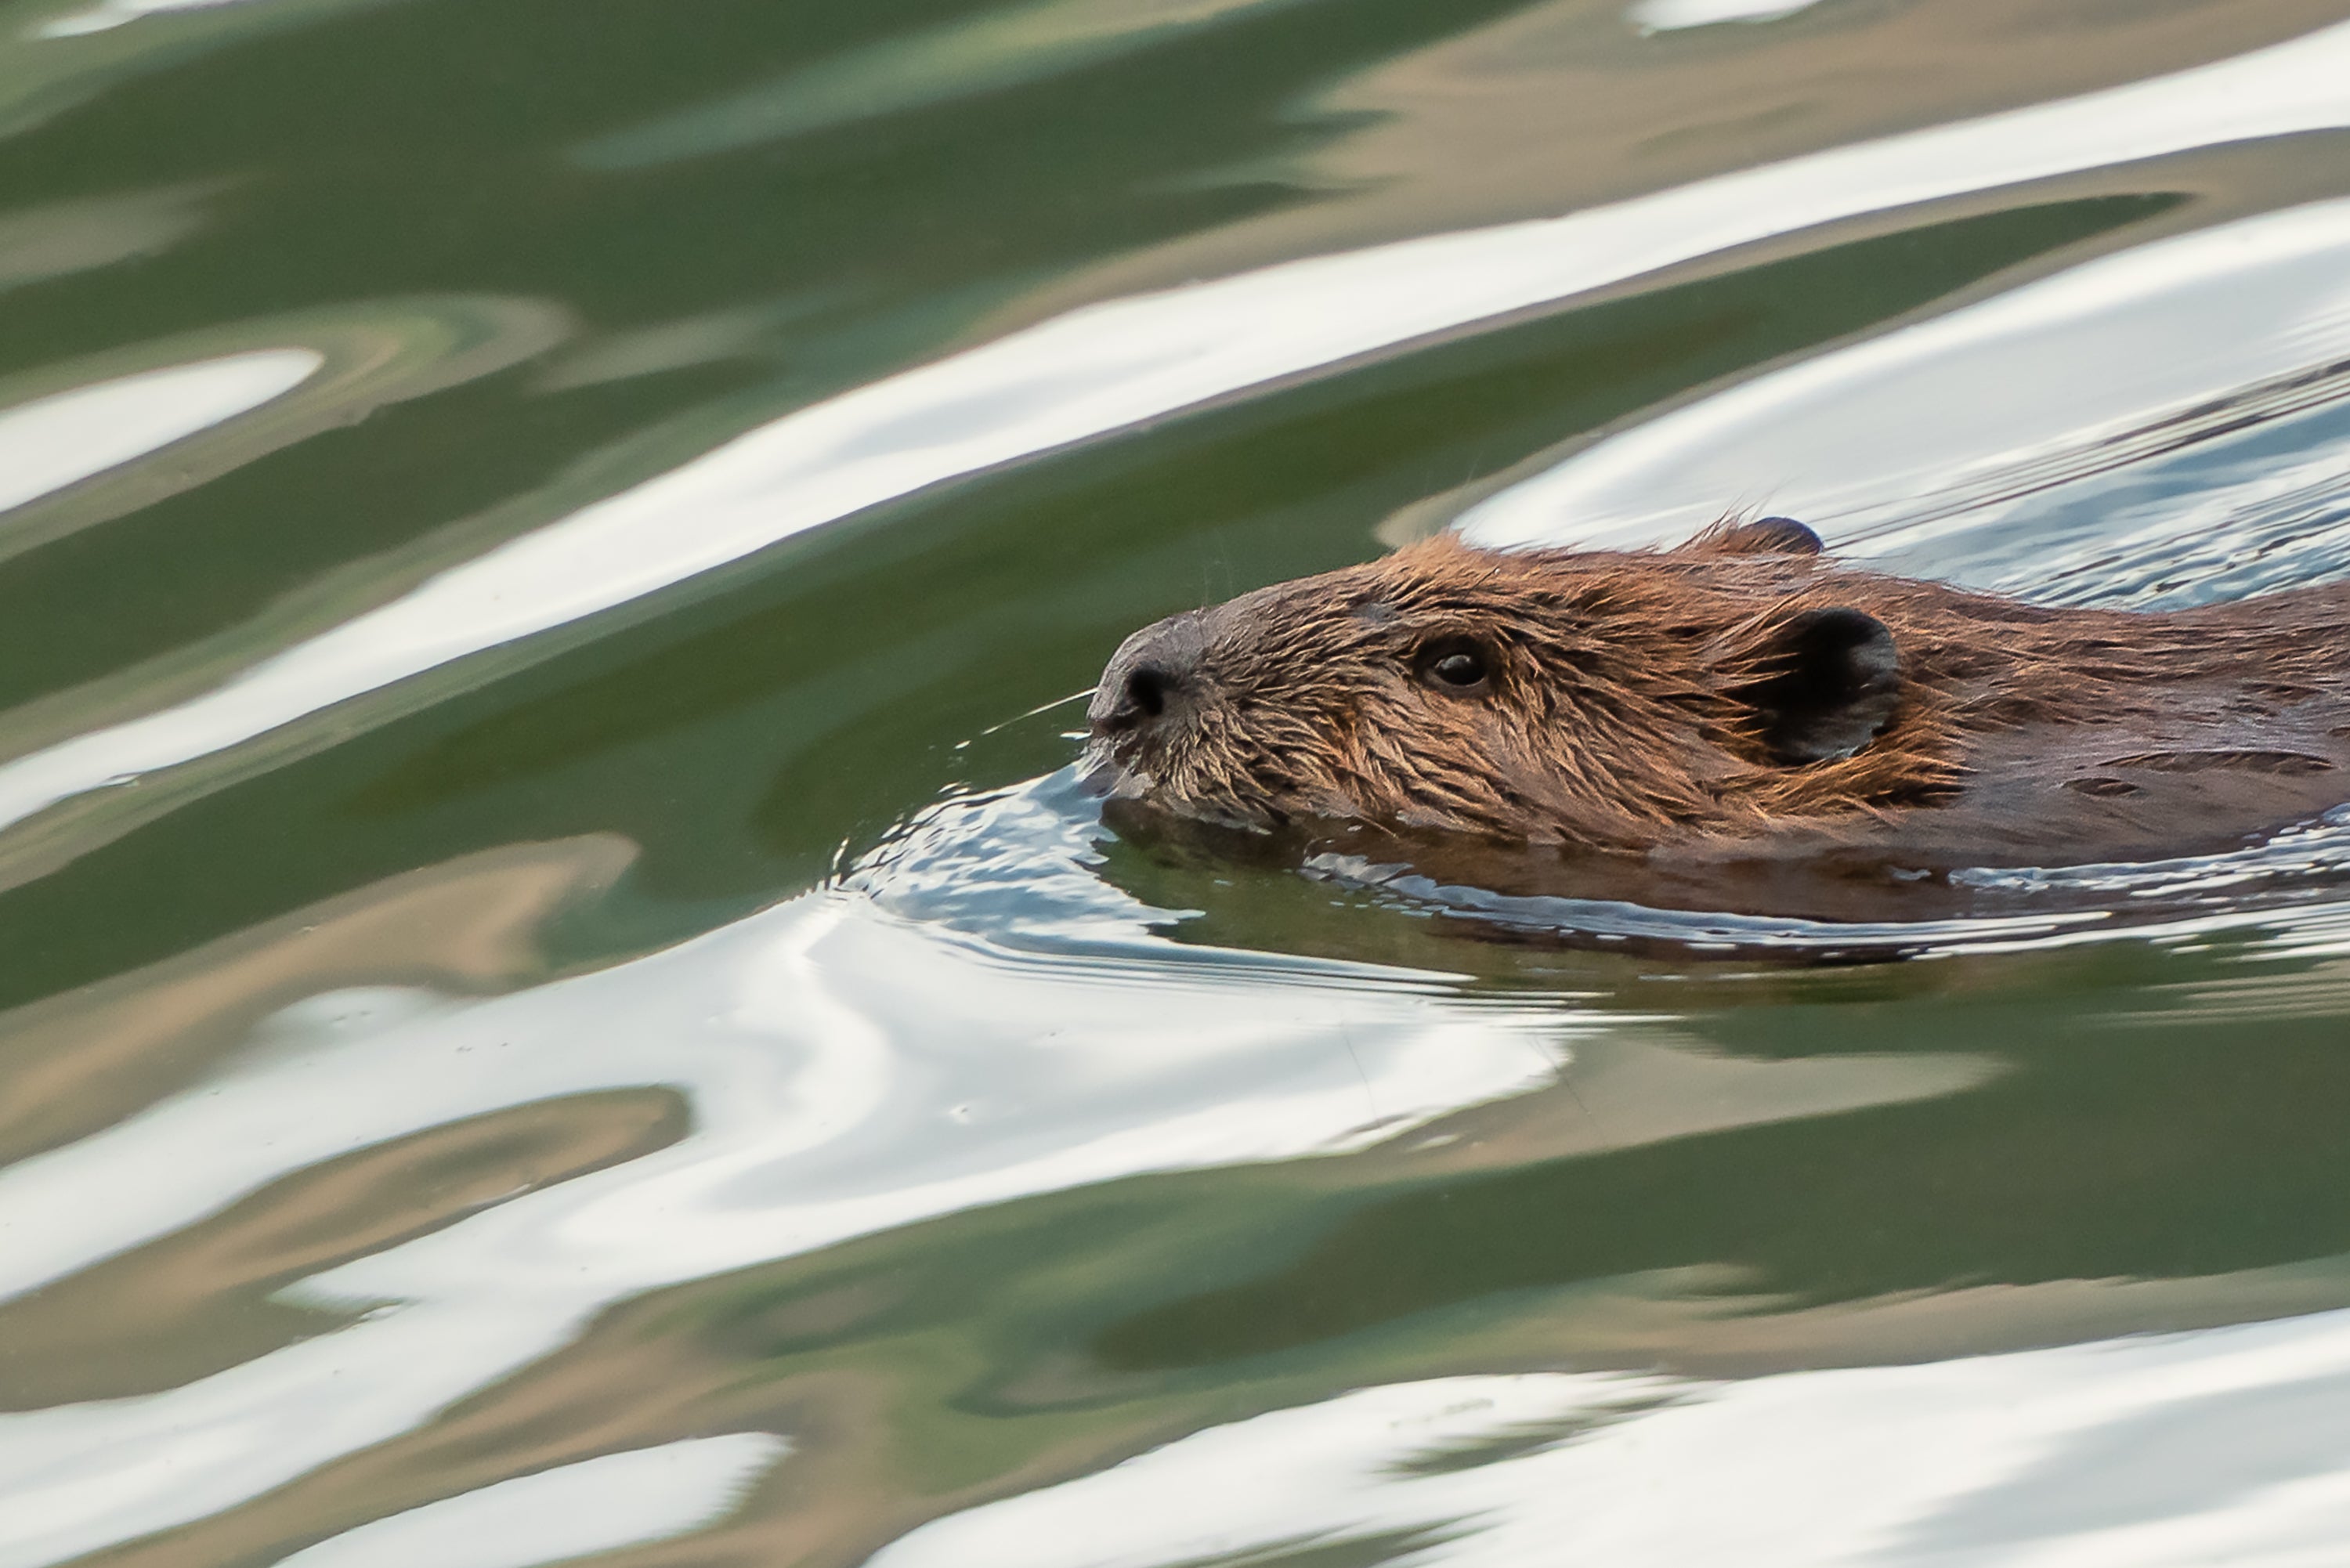 Beavers were first reintroduced in Britain in 2019 after going largely extinct 400 years ago